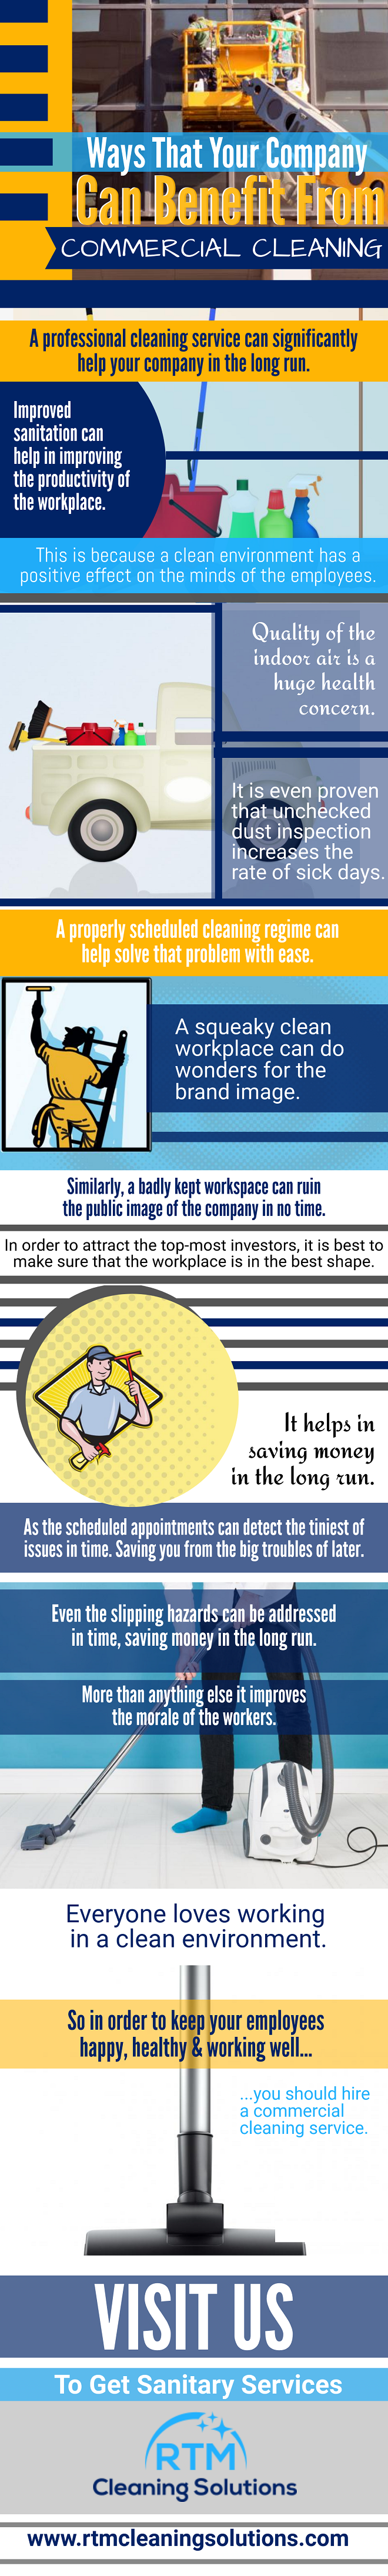 Infographic showing benefits of cleaning company edmonton